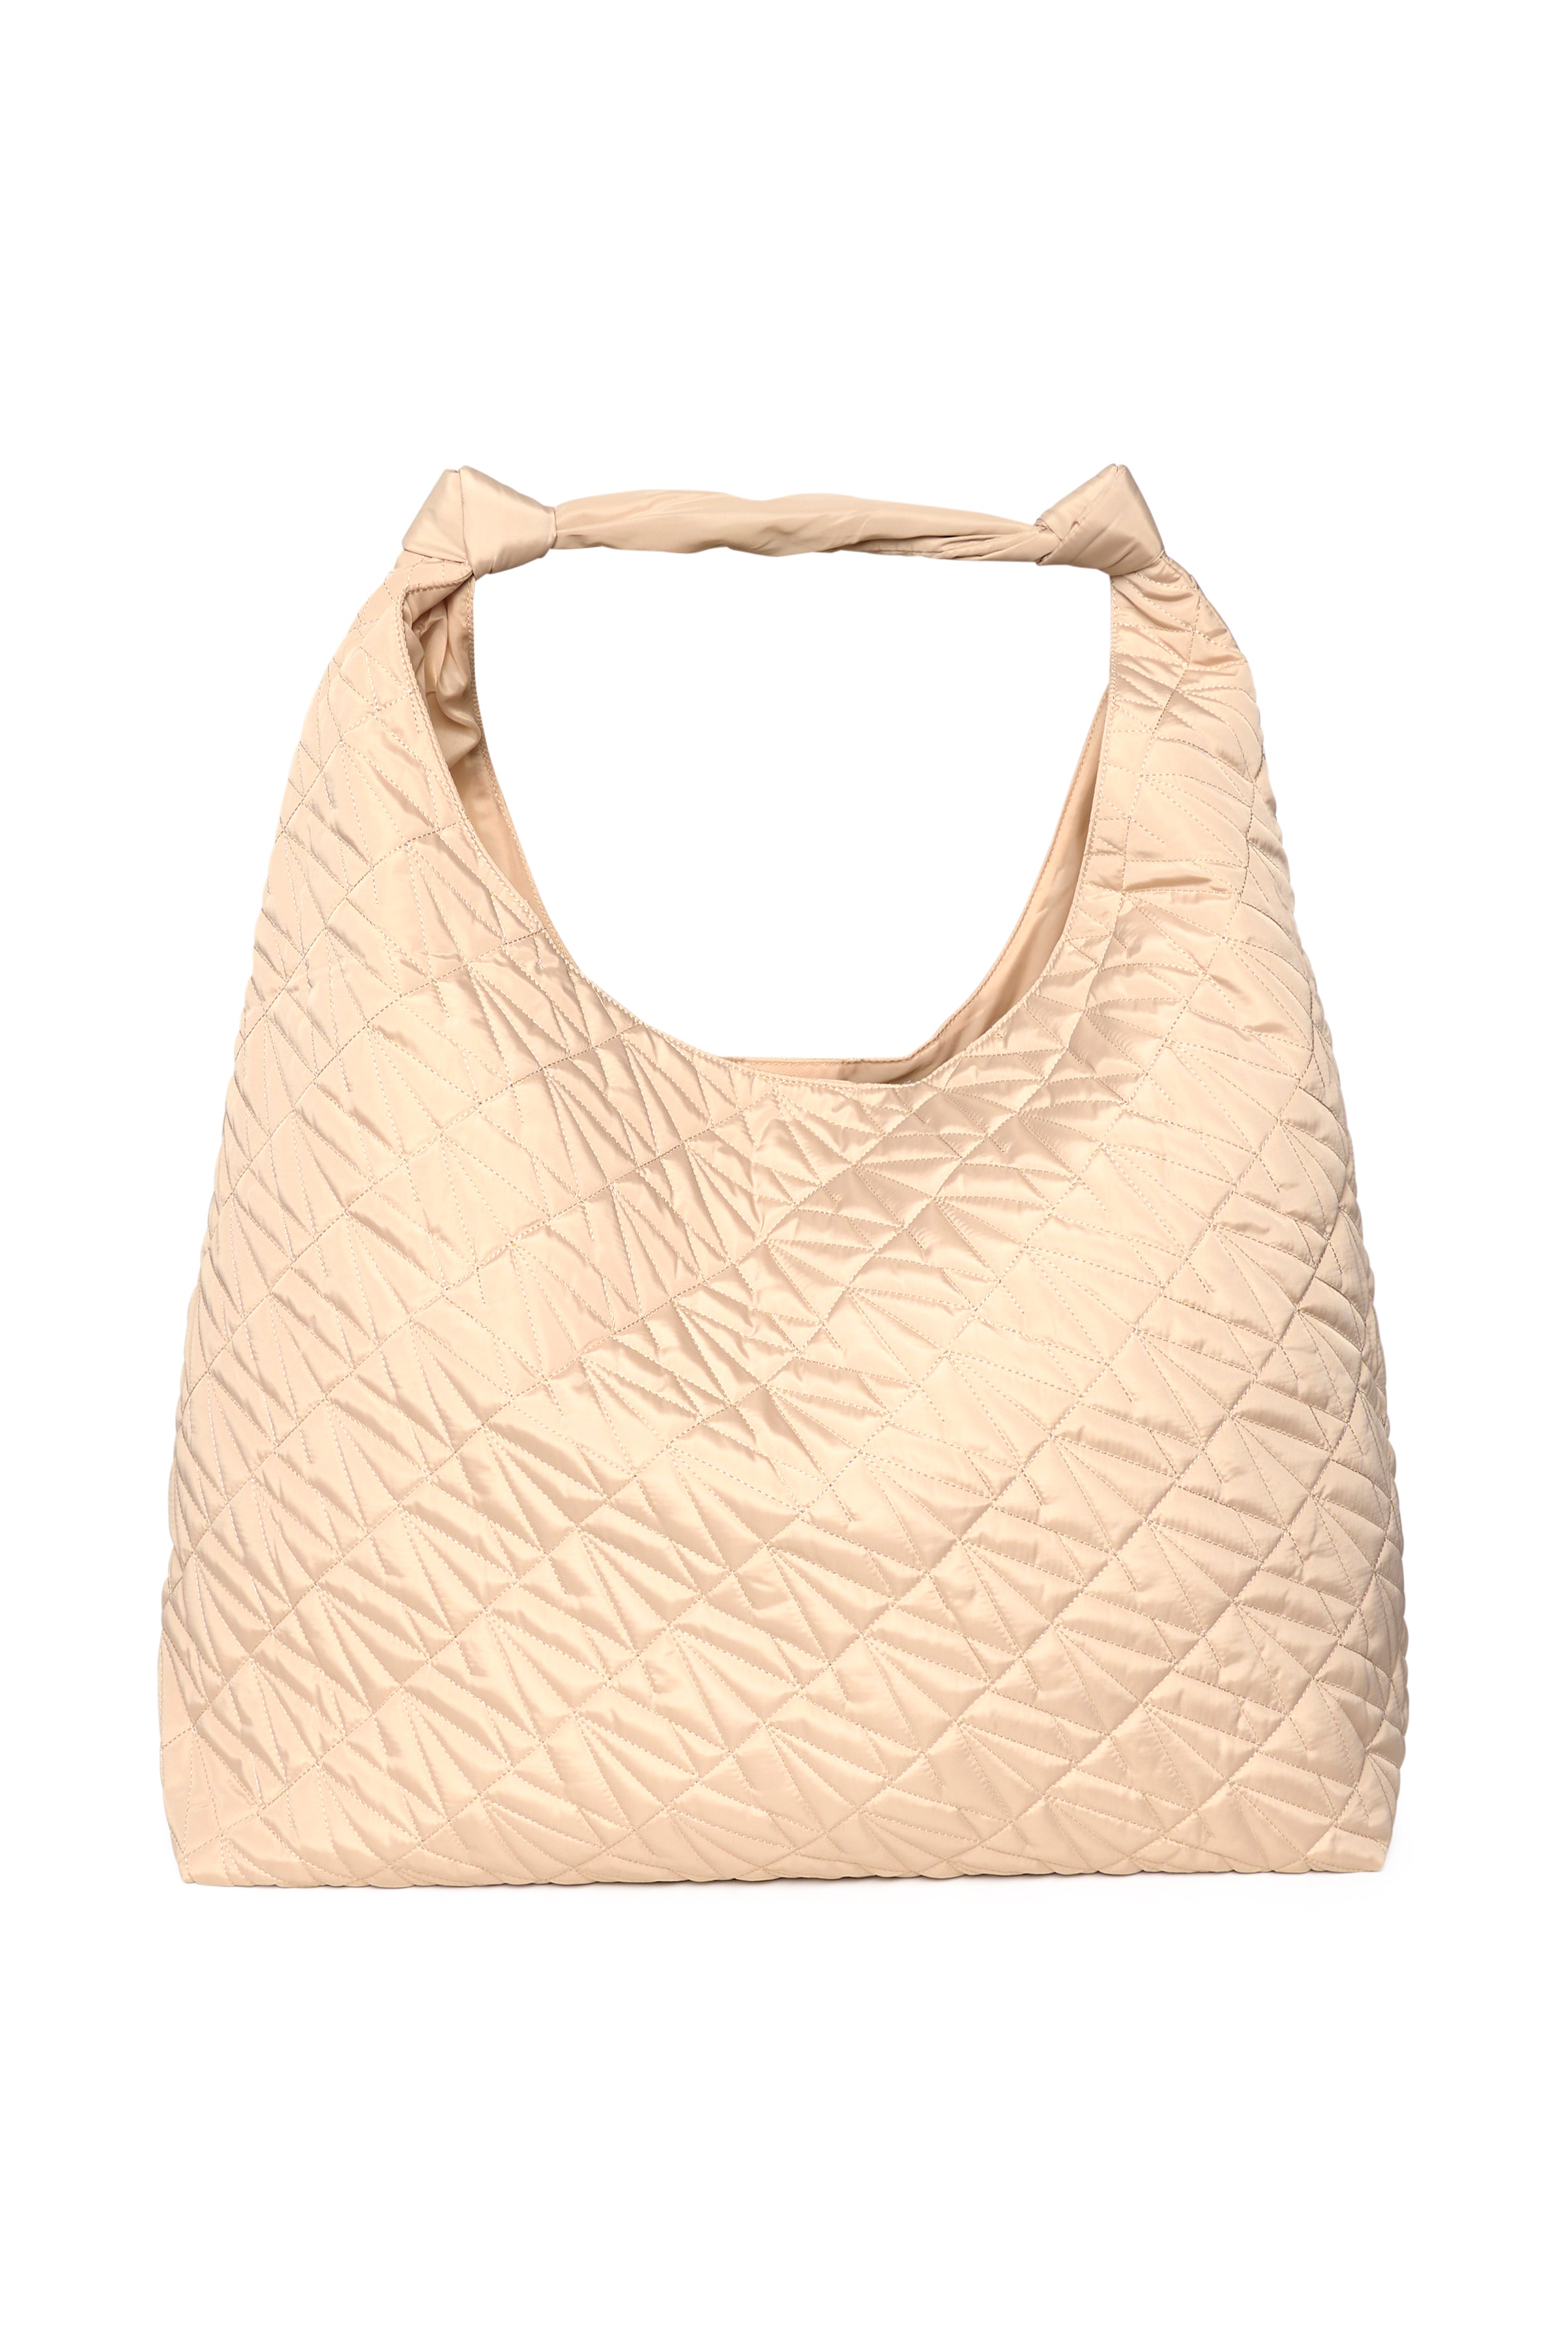 IN WEAR SLOUCH OVERSIZED HAND BAG SAND